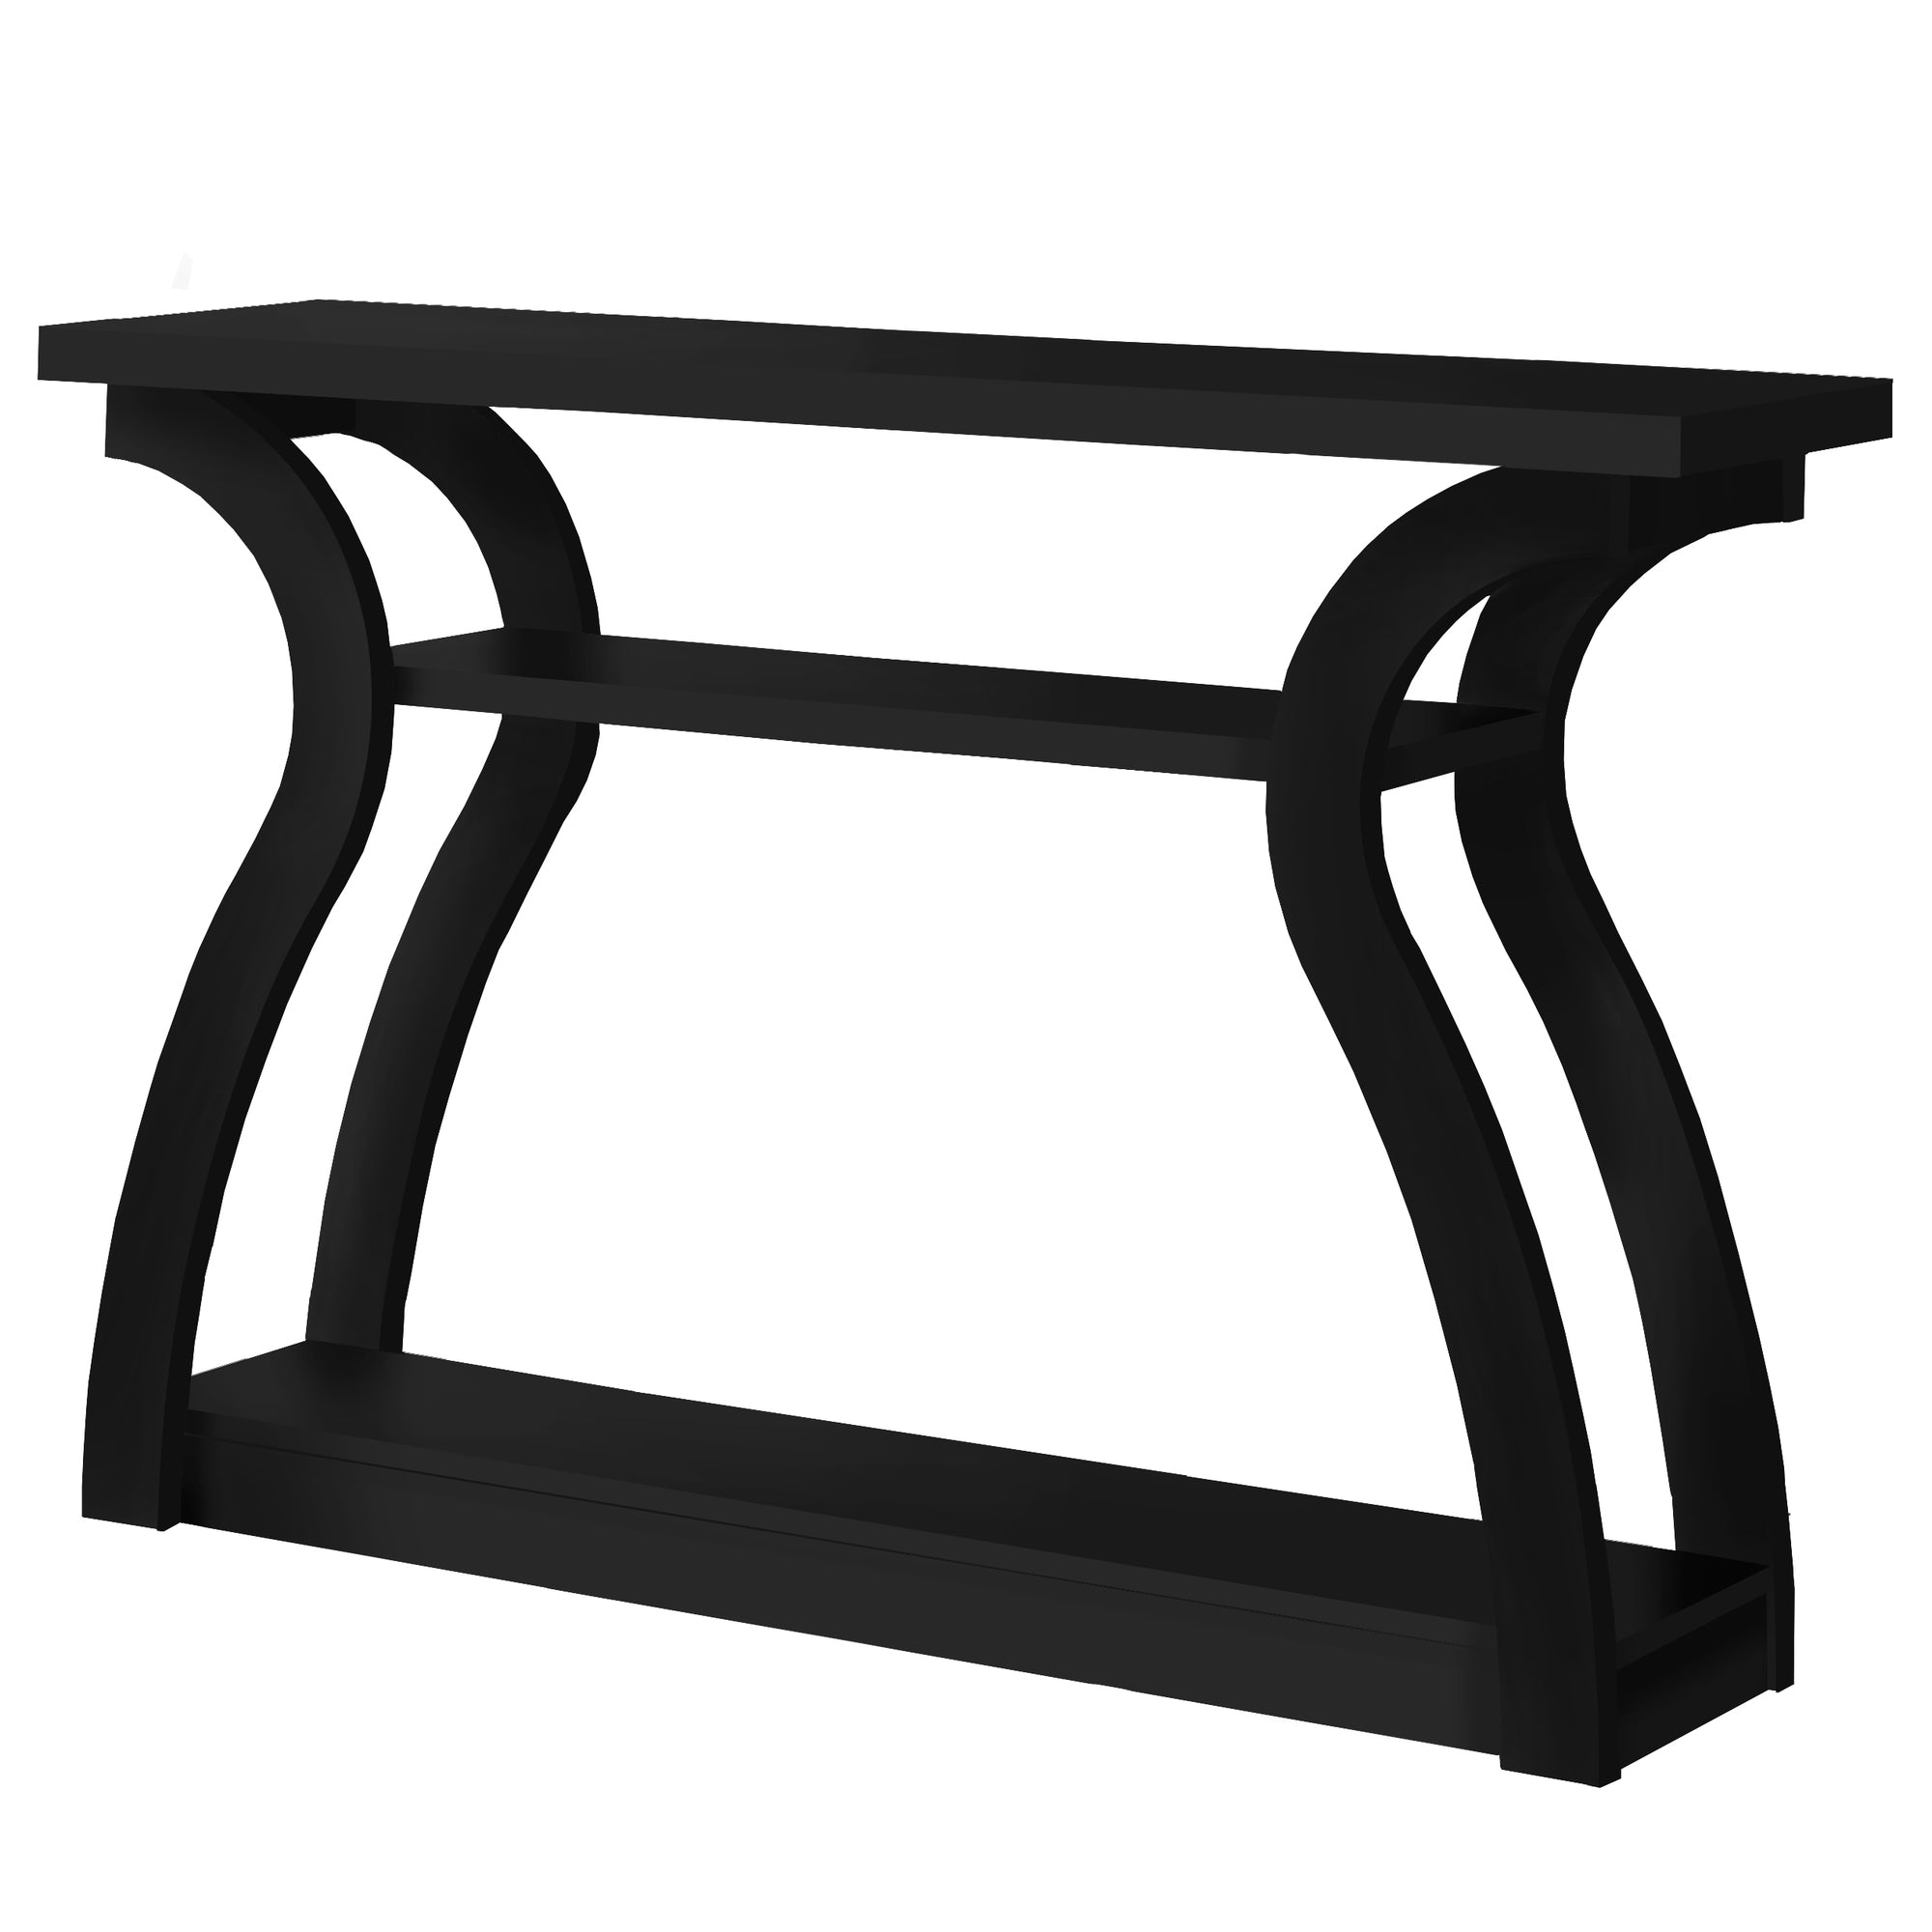 47" Black Floor Shelf Console Table With Storage